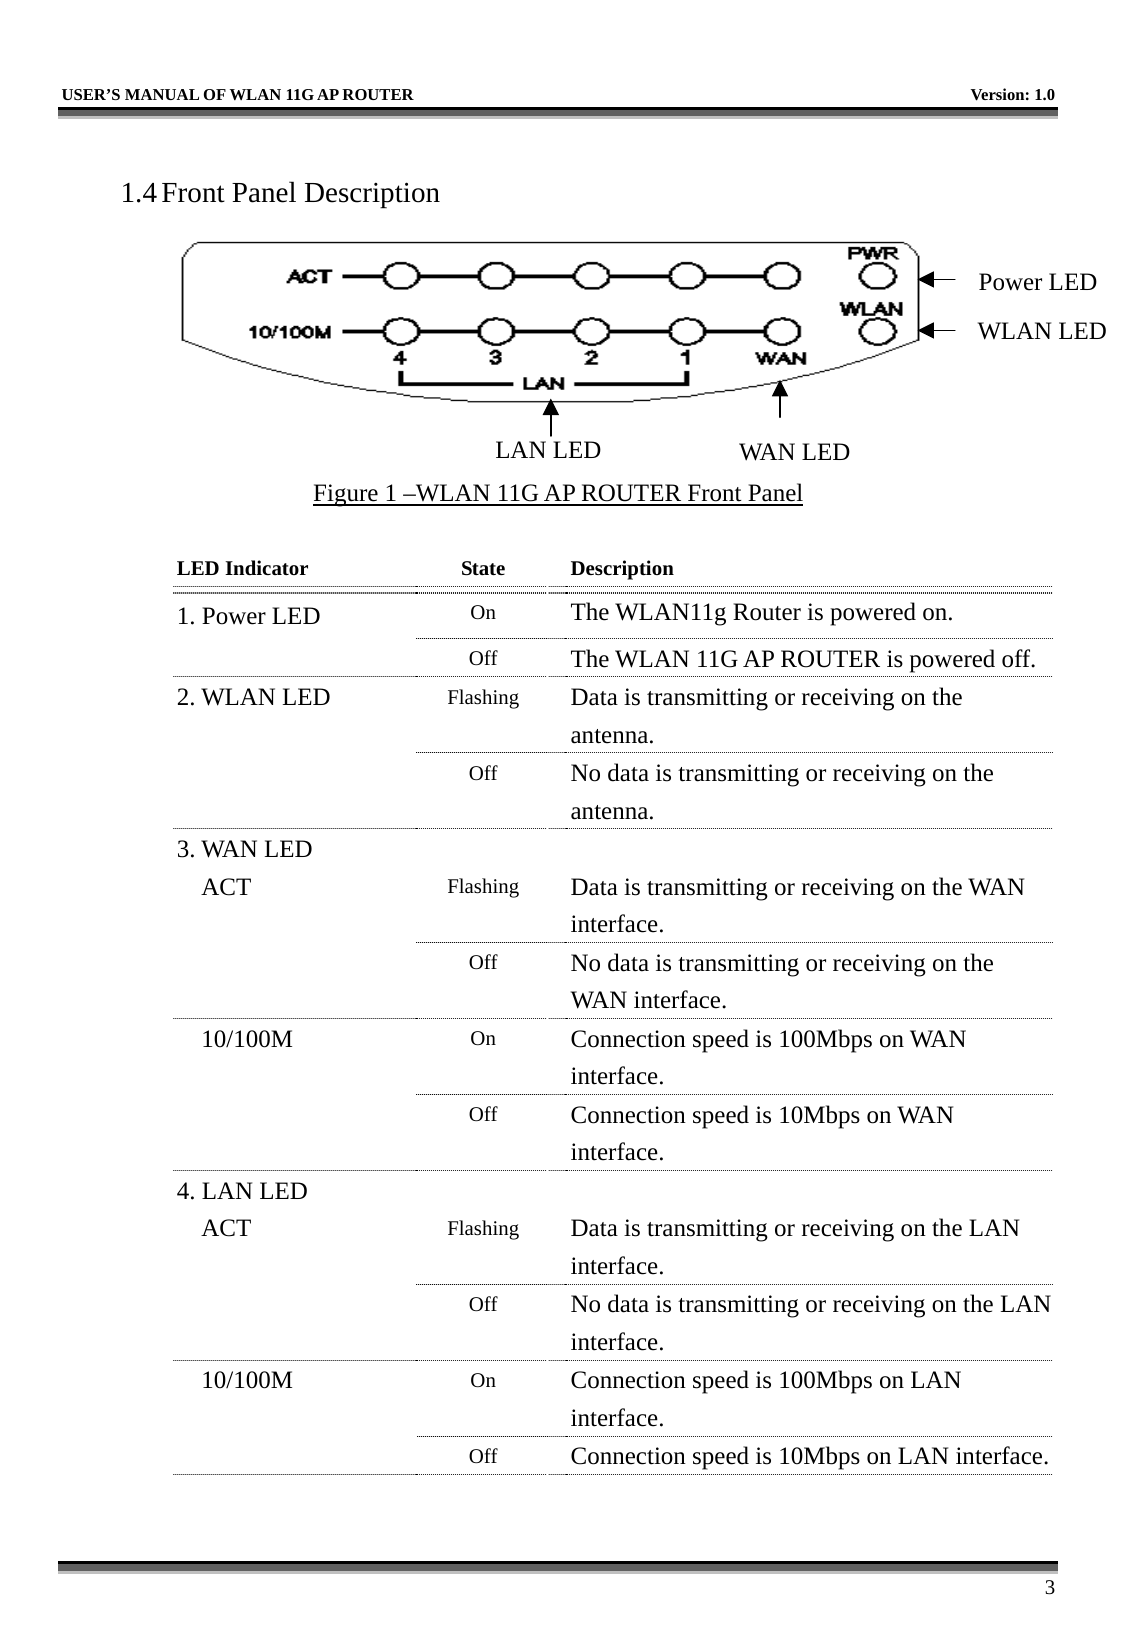   USER’S MANUAL OF WLAN 11G AP ROUTER    Version: 1.0     3  1.4 Front Panel Description   Figure 1 –WLAN 11G AP ROUTER Front Panel  LED Indicator    State  Description 1. Power LED     On  The WLAN11g Router is powered on.   Off  The WLAN 11G AP ROUTER is powered off.2. WLAN LED   Flashing  Data is transmitting or receiving on the antenna.   Off  No data is transmitting or receiving on the antenna. 3. WAN LED      ACT   Flashing  Data is transmitting or receiving on the WAN interface.   Off  No data is transmitting or receiving on the WAN interface. 10/100M   On  Connection speed is 100Mbps on WAN interface.   Off  Connection speed is 10Mbps on WAN interface. 4. LAN LED      ACT   Flashing  Data is transmitting or receiving on the LAN interface.   Off  No data is transmitting or receiving on the LAN interface. 10/100M   On  Connection speed is 100Mbps on LAN interface.   Off  Connection speed is 10Mbps on LAN interface.WAN LED LAN LEDPower LEDWLAN LED